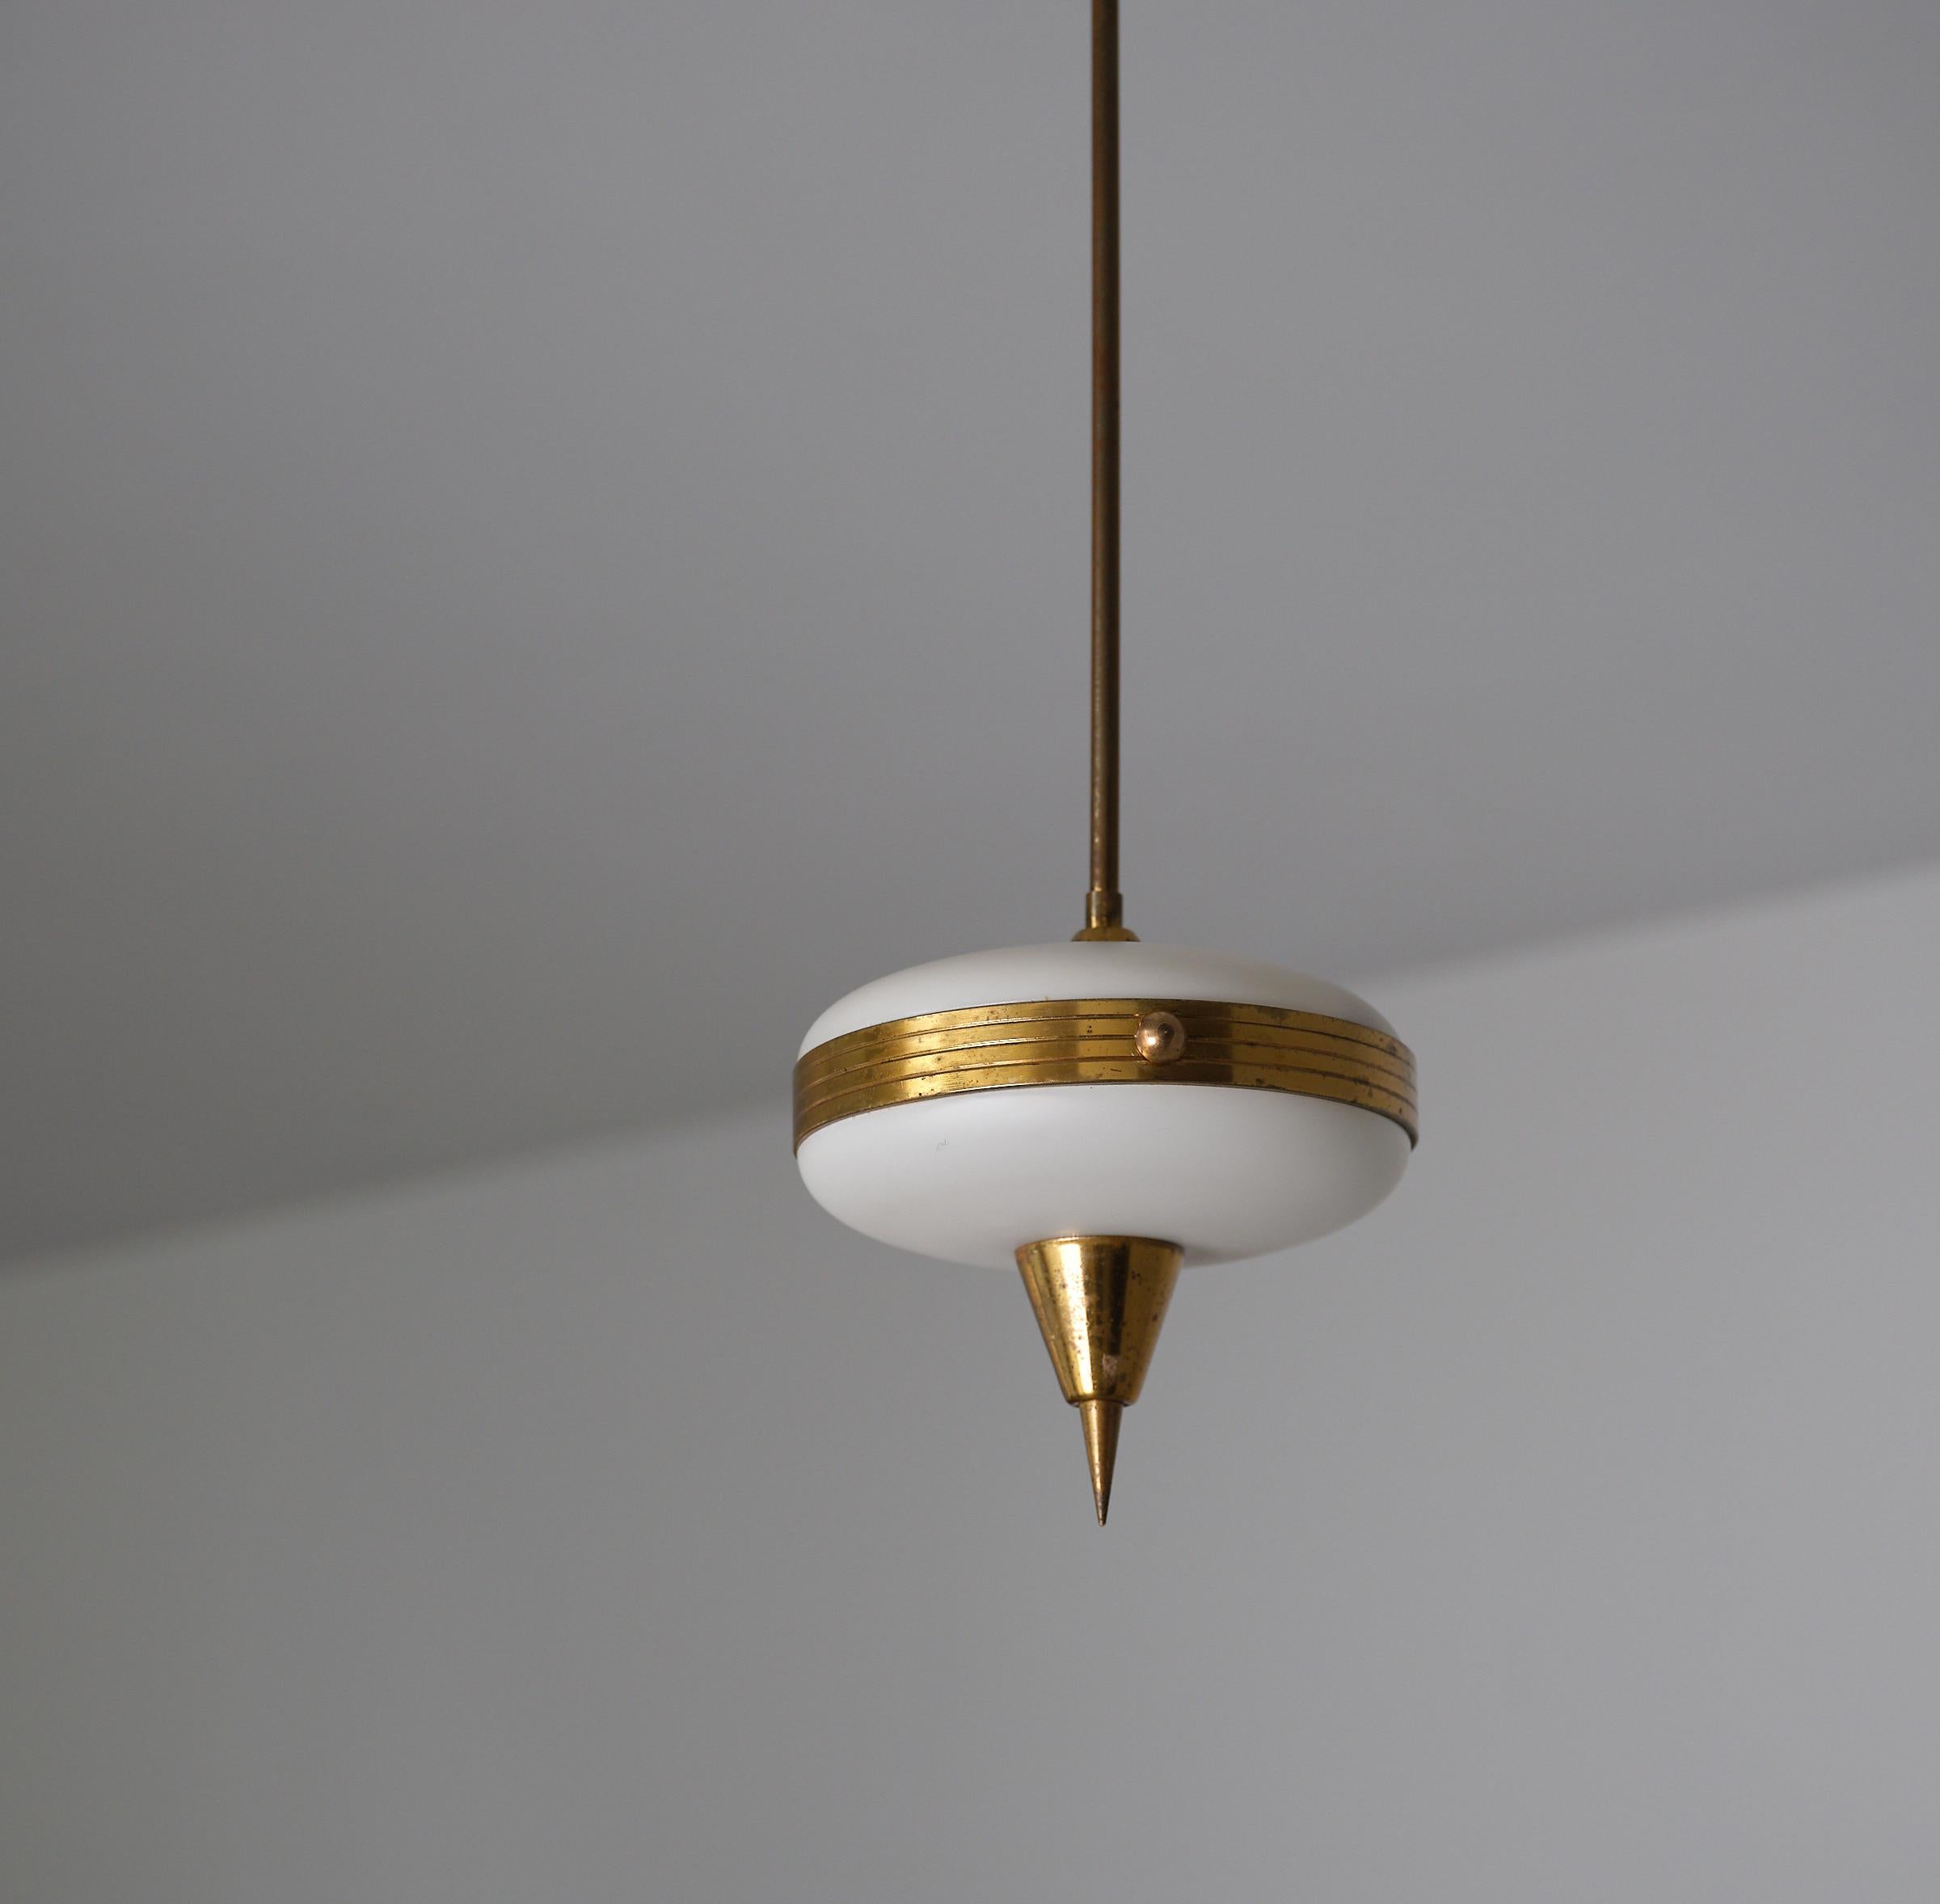 Mid-20th Century Petite Italian Brass and Opaline Pendant Lamp – 1950s Modernist For Sale